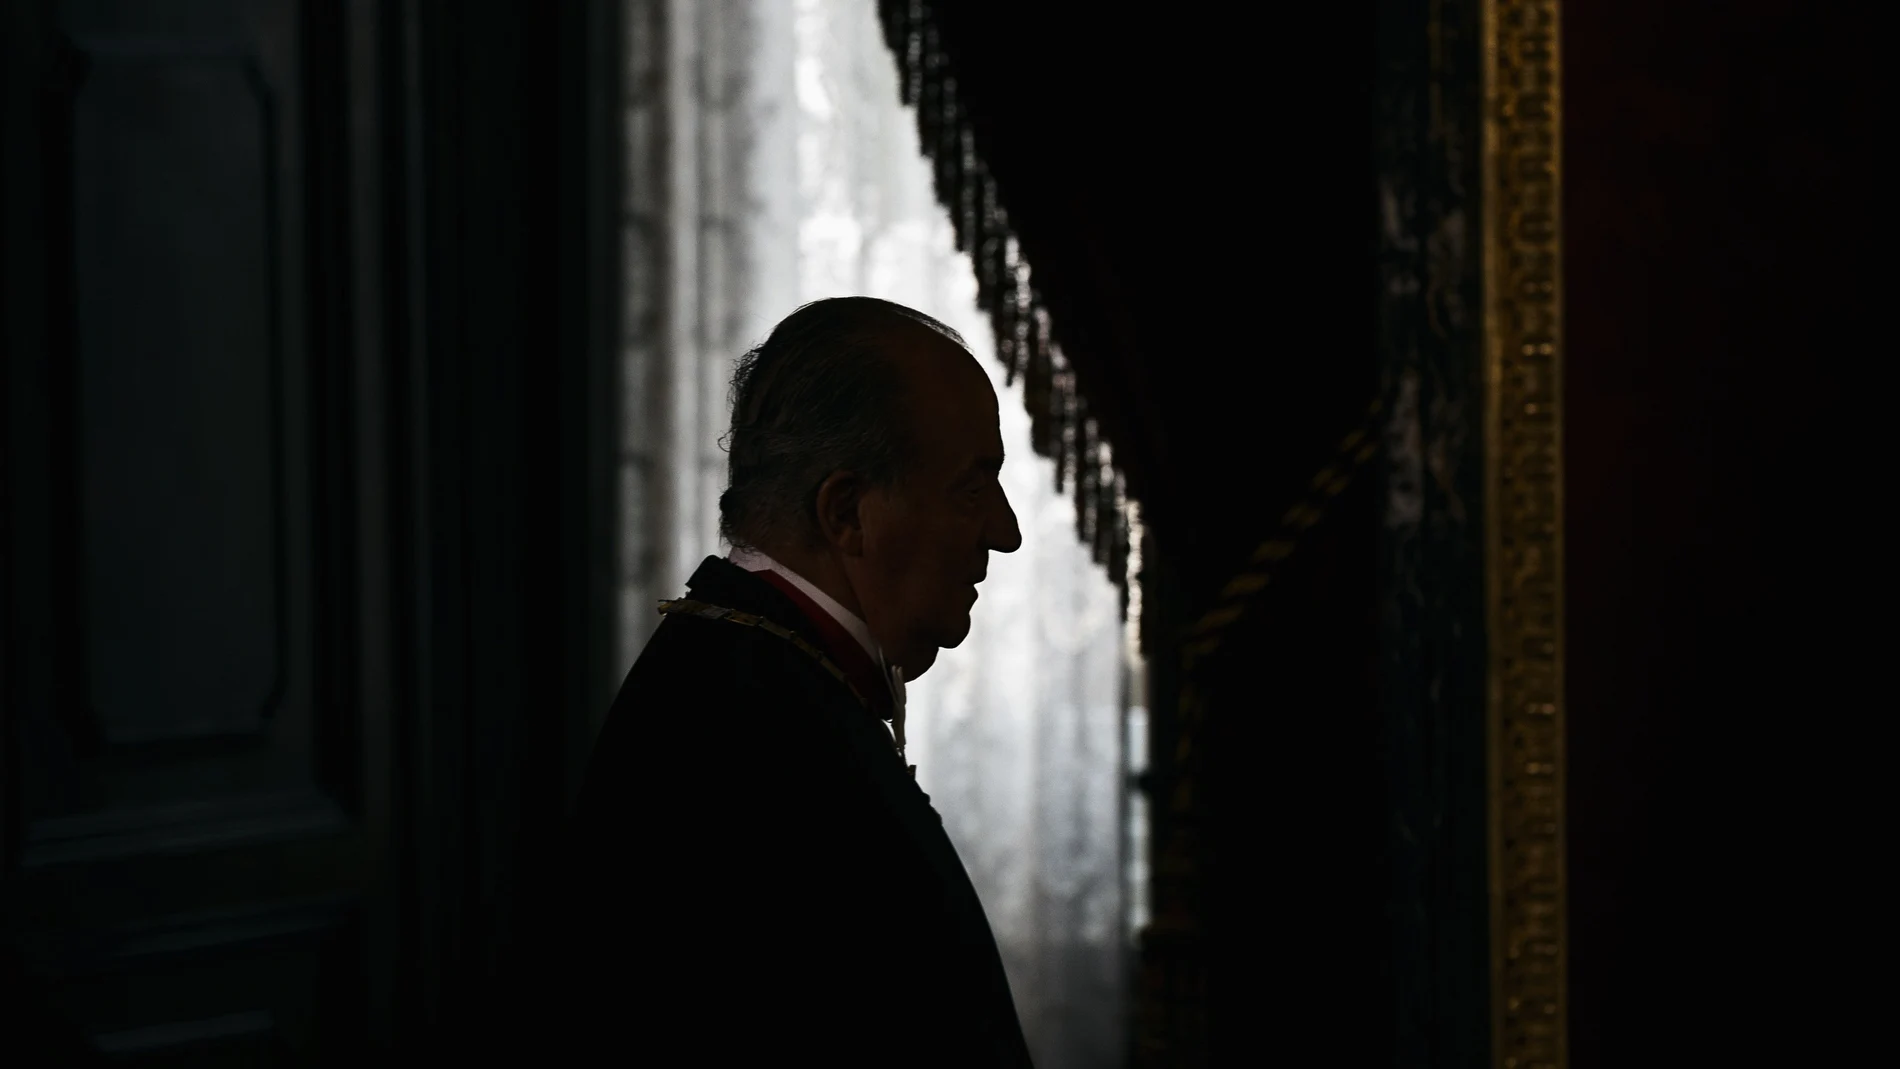 Spain's King Juan Carlos enters a room before a gala dinner for Mexico's President Enrique Pena Nieto at the Royal Palace.